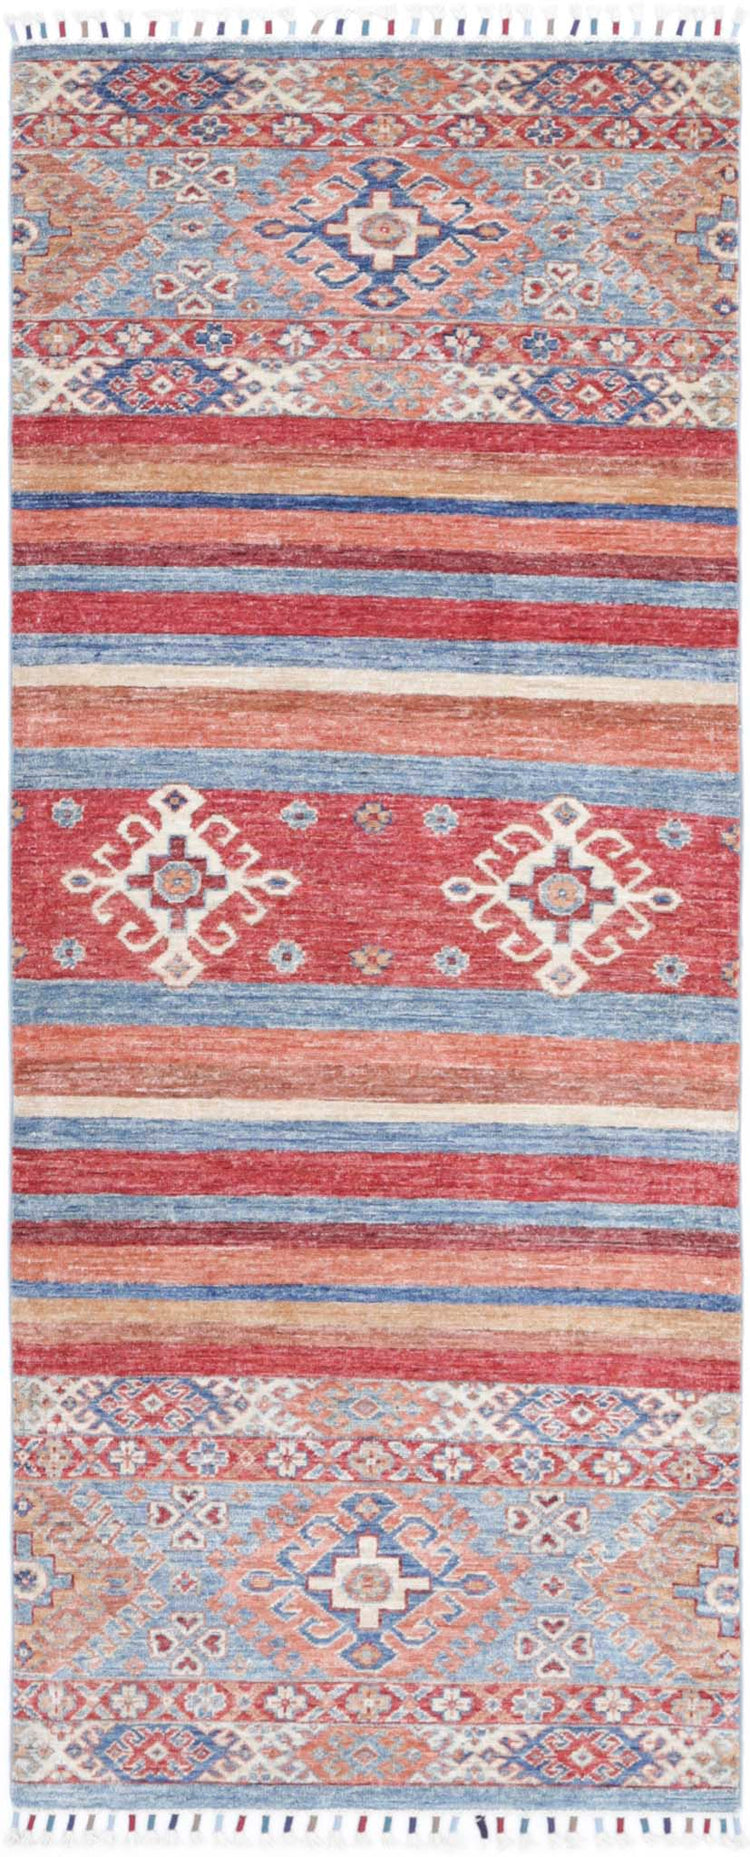 Traditional Hand Knotted Khurjeen Farhan Wool Rug of Size 2'6'' X 6'8'' in Multi and Multi Colors - Made in Afghanistan